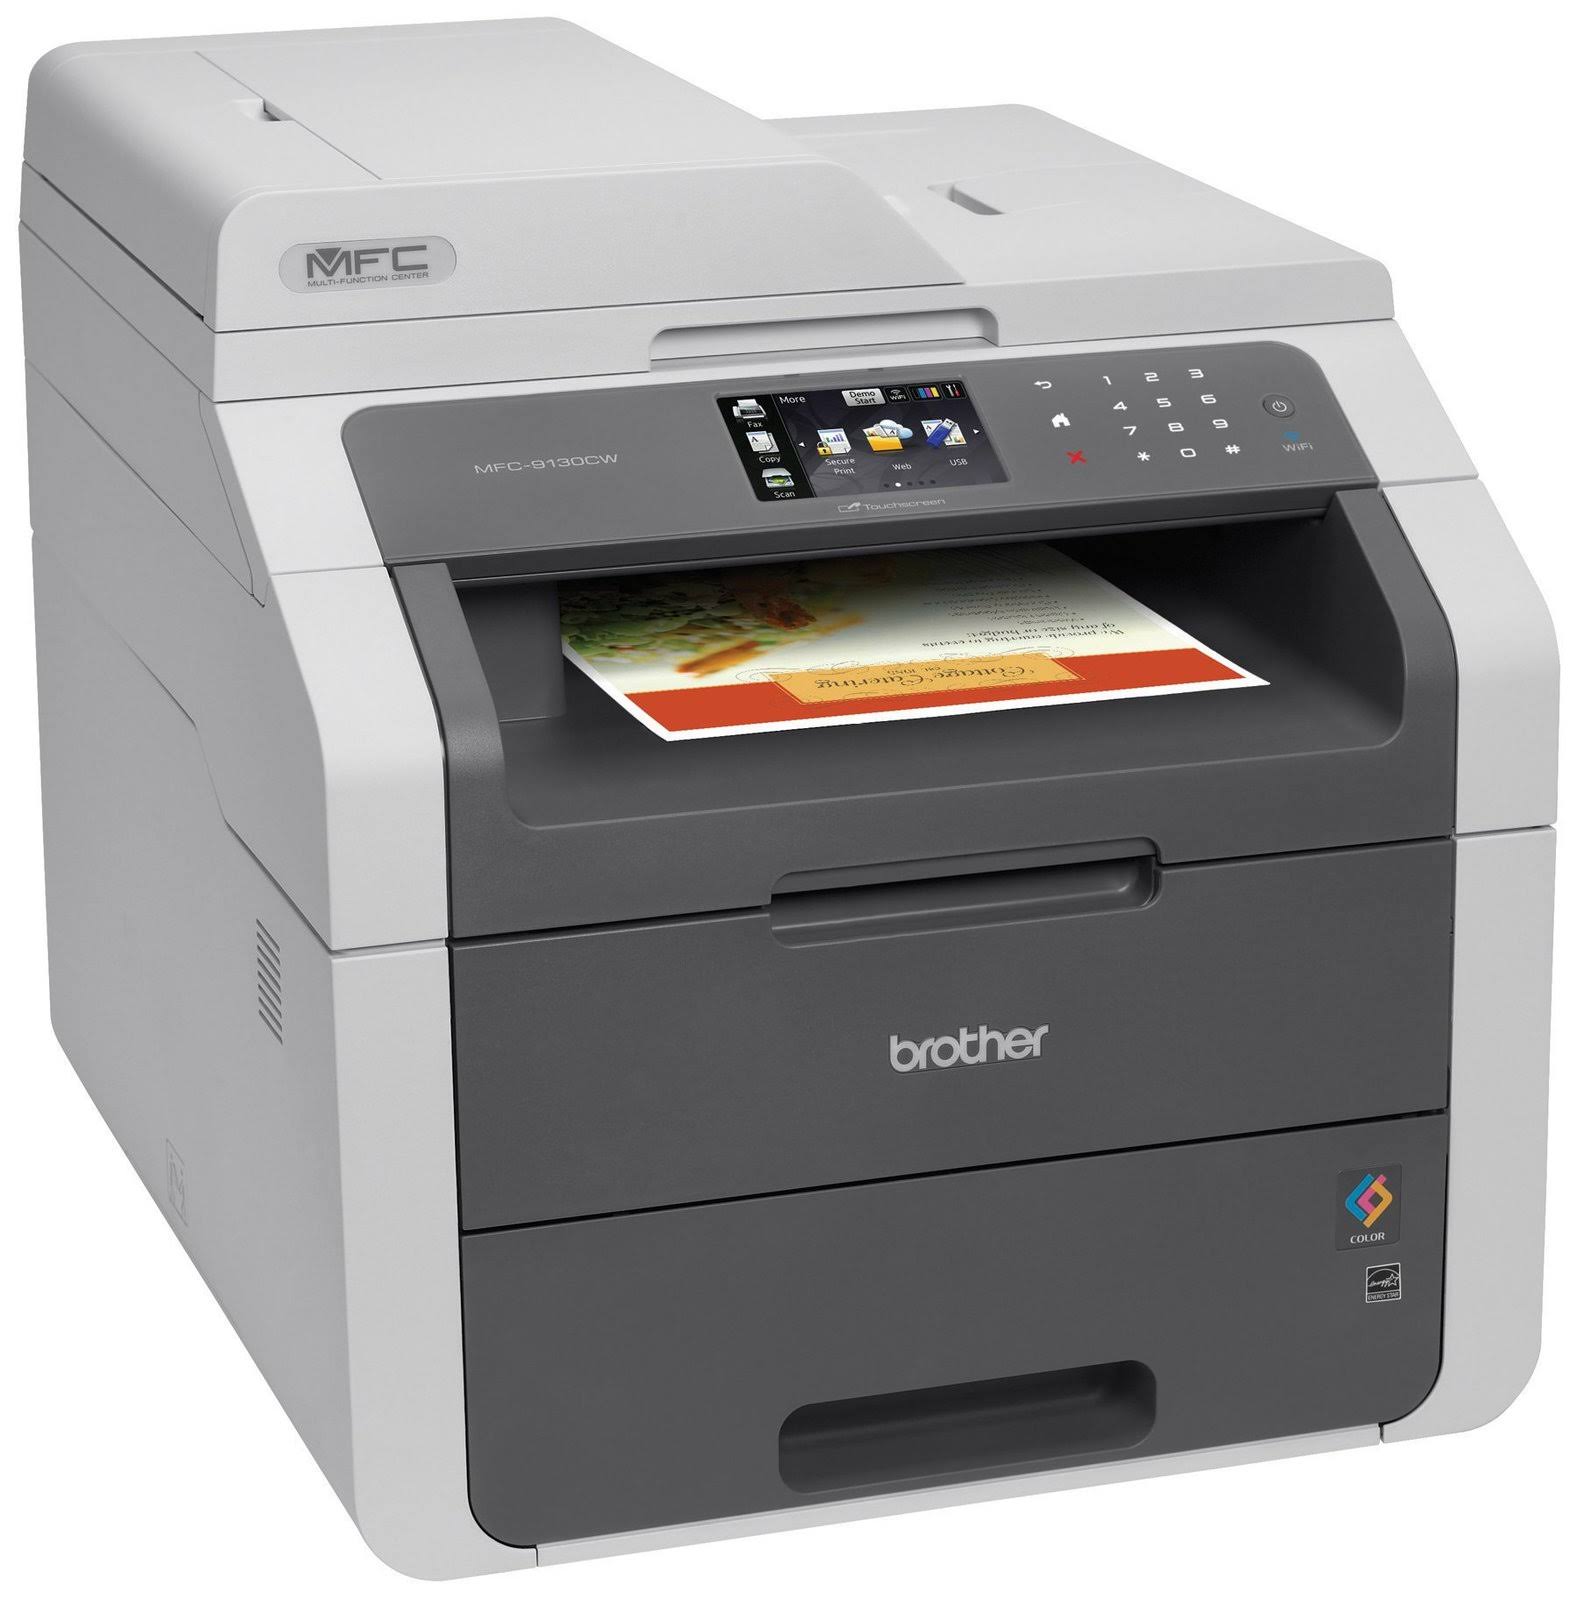 Brother Printer Brother MFC9130CW Wireless All-In-One Printer with Scanner, Copier and Fax, Amazon Dash Replenishment Enabled